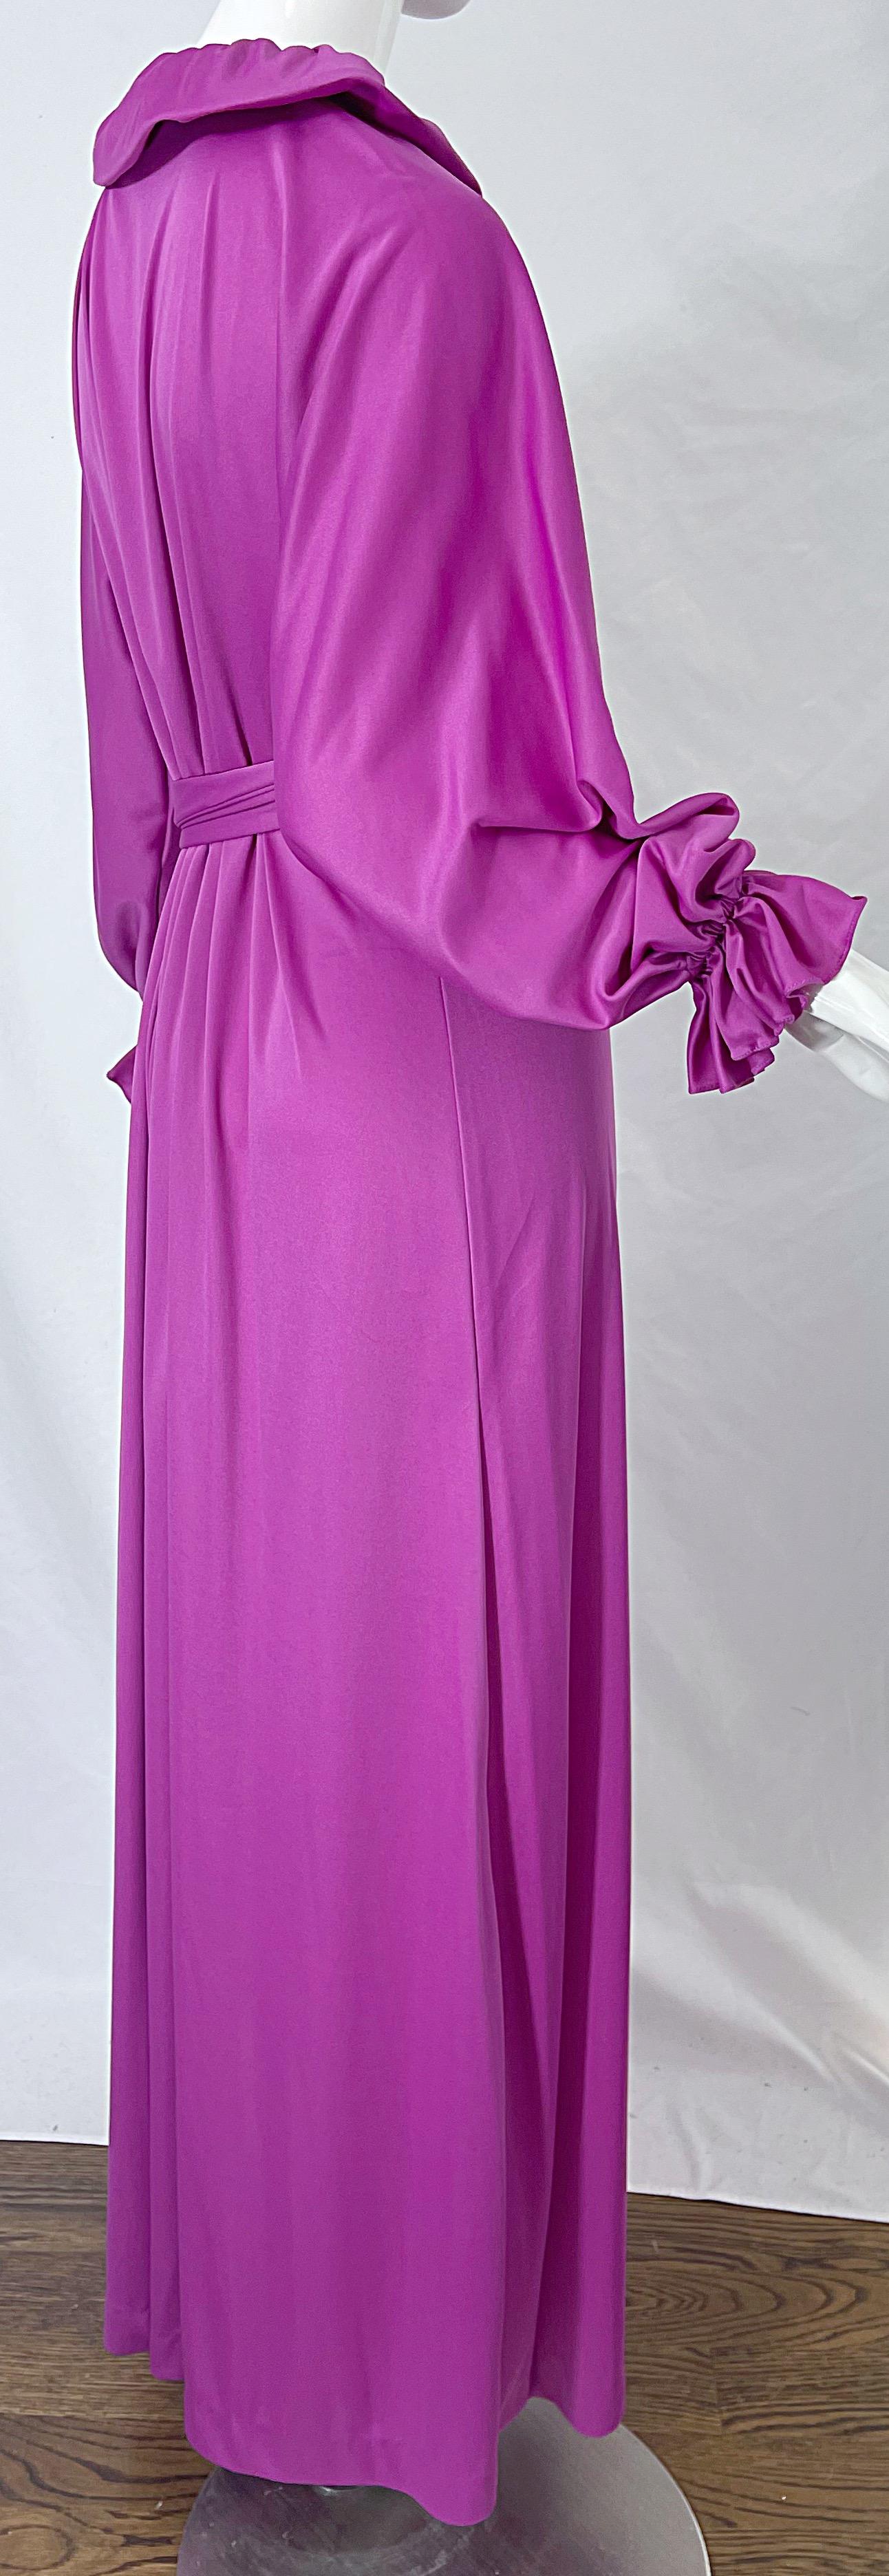 NWT 1970s Halston IV Purple / Pink One Size Fits All Vintage 70s Maxi Dress For Sale 11